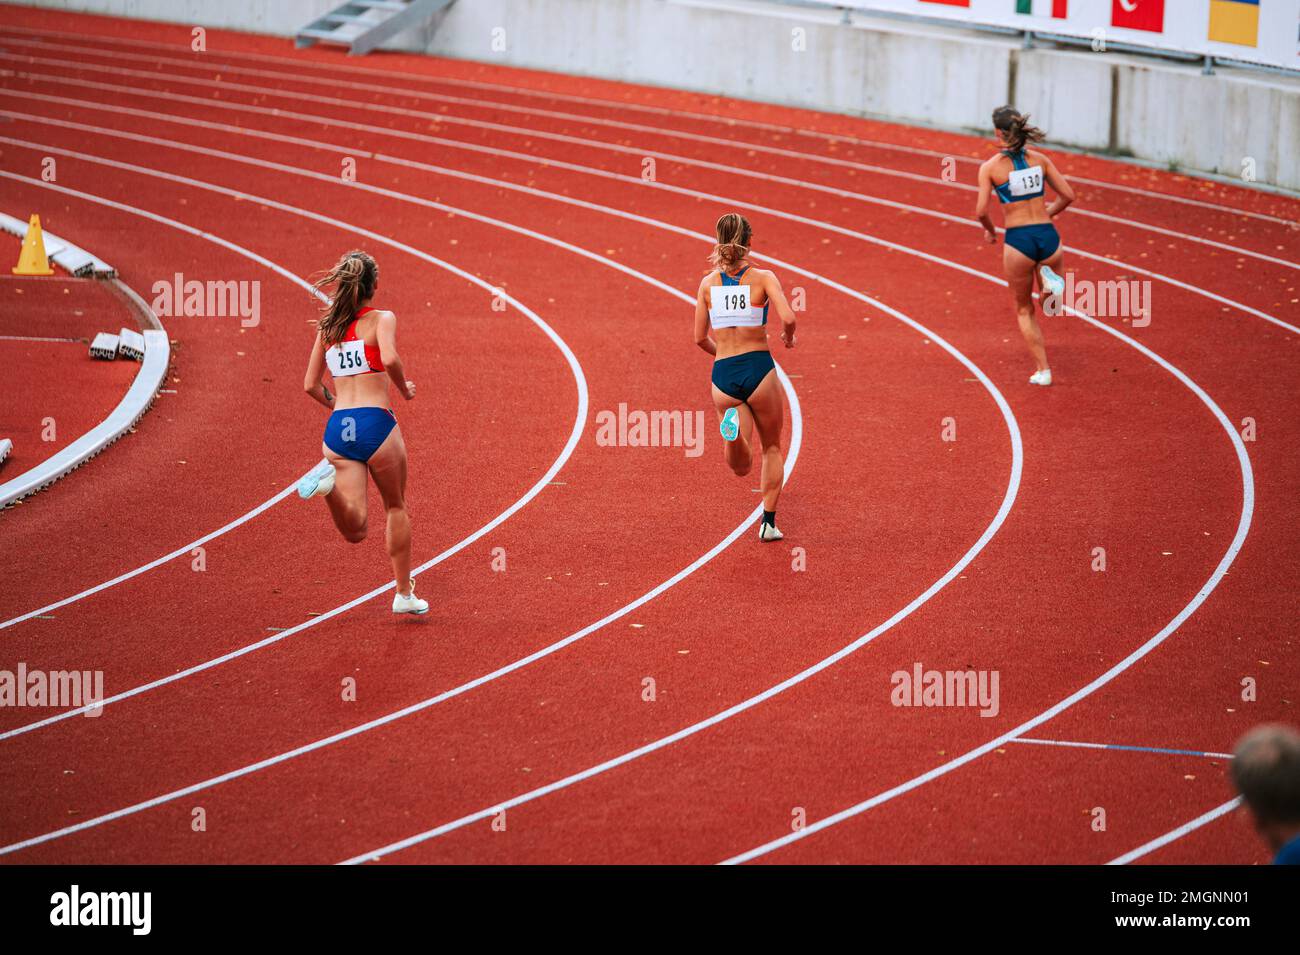 Female athletes at the starting line of a 400m race on track, showcasing their focus and determination as they prepare to compete Stock Photo